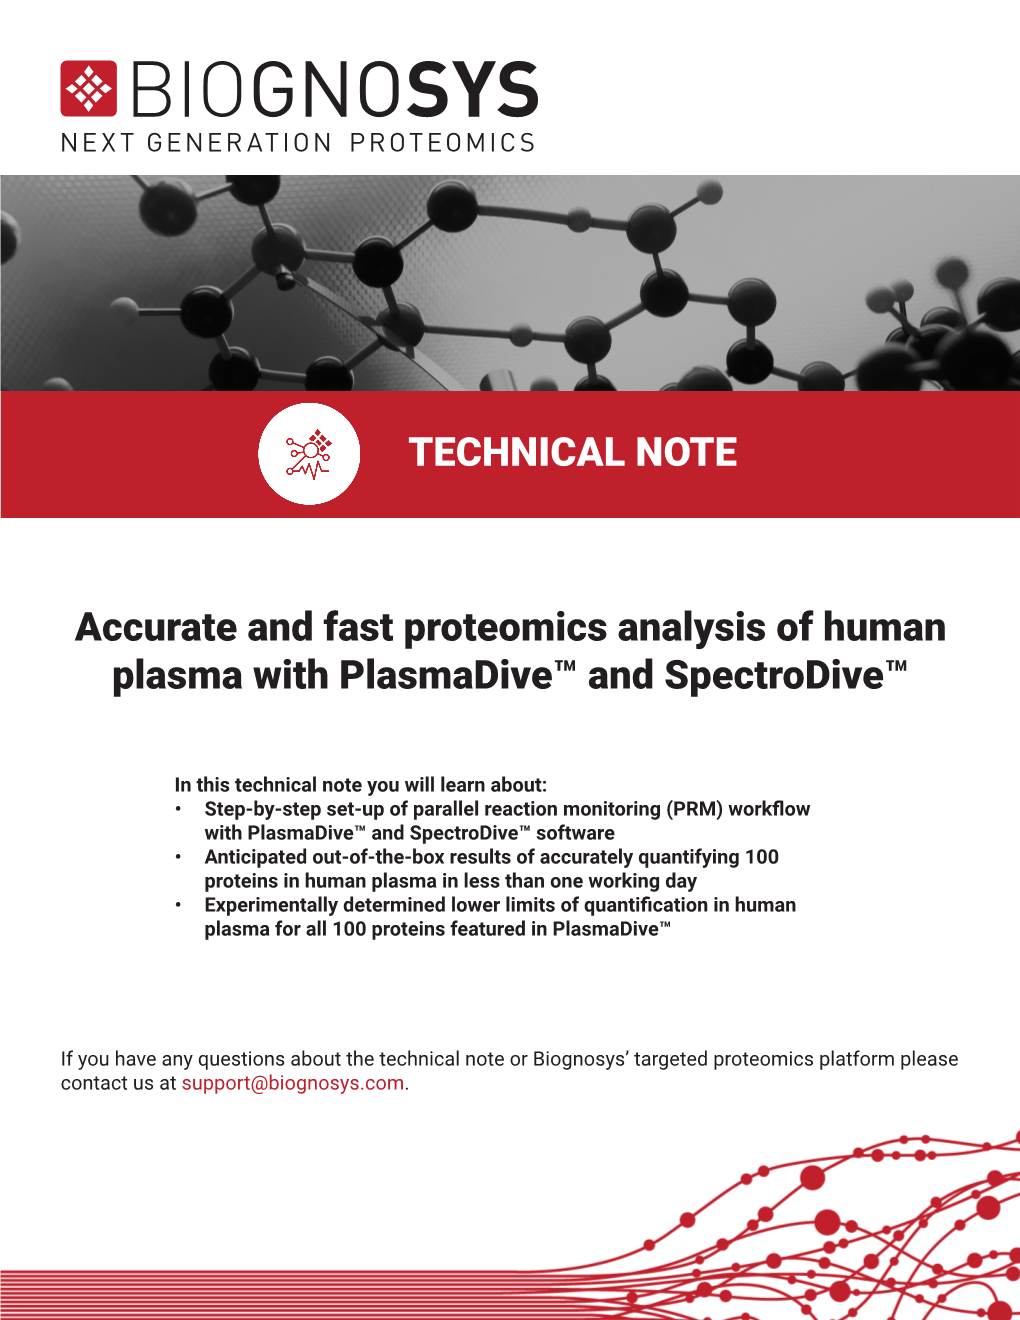 Accurate and Fast Proteomics Analysis of Human Plasma with Plasmadive™ and Spectrodive™